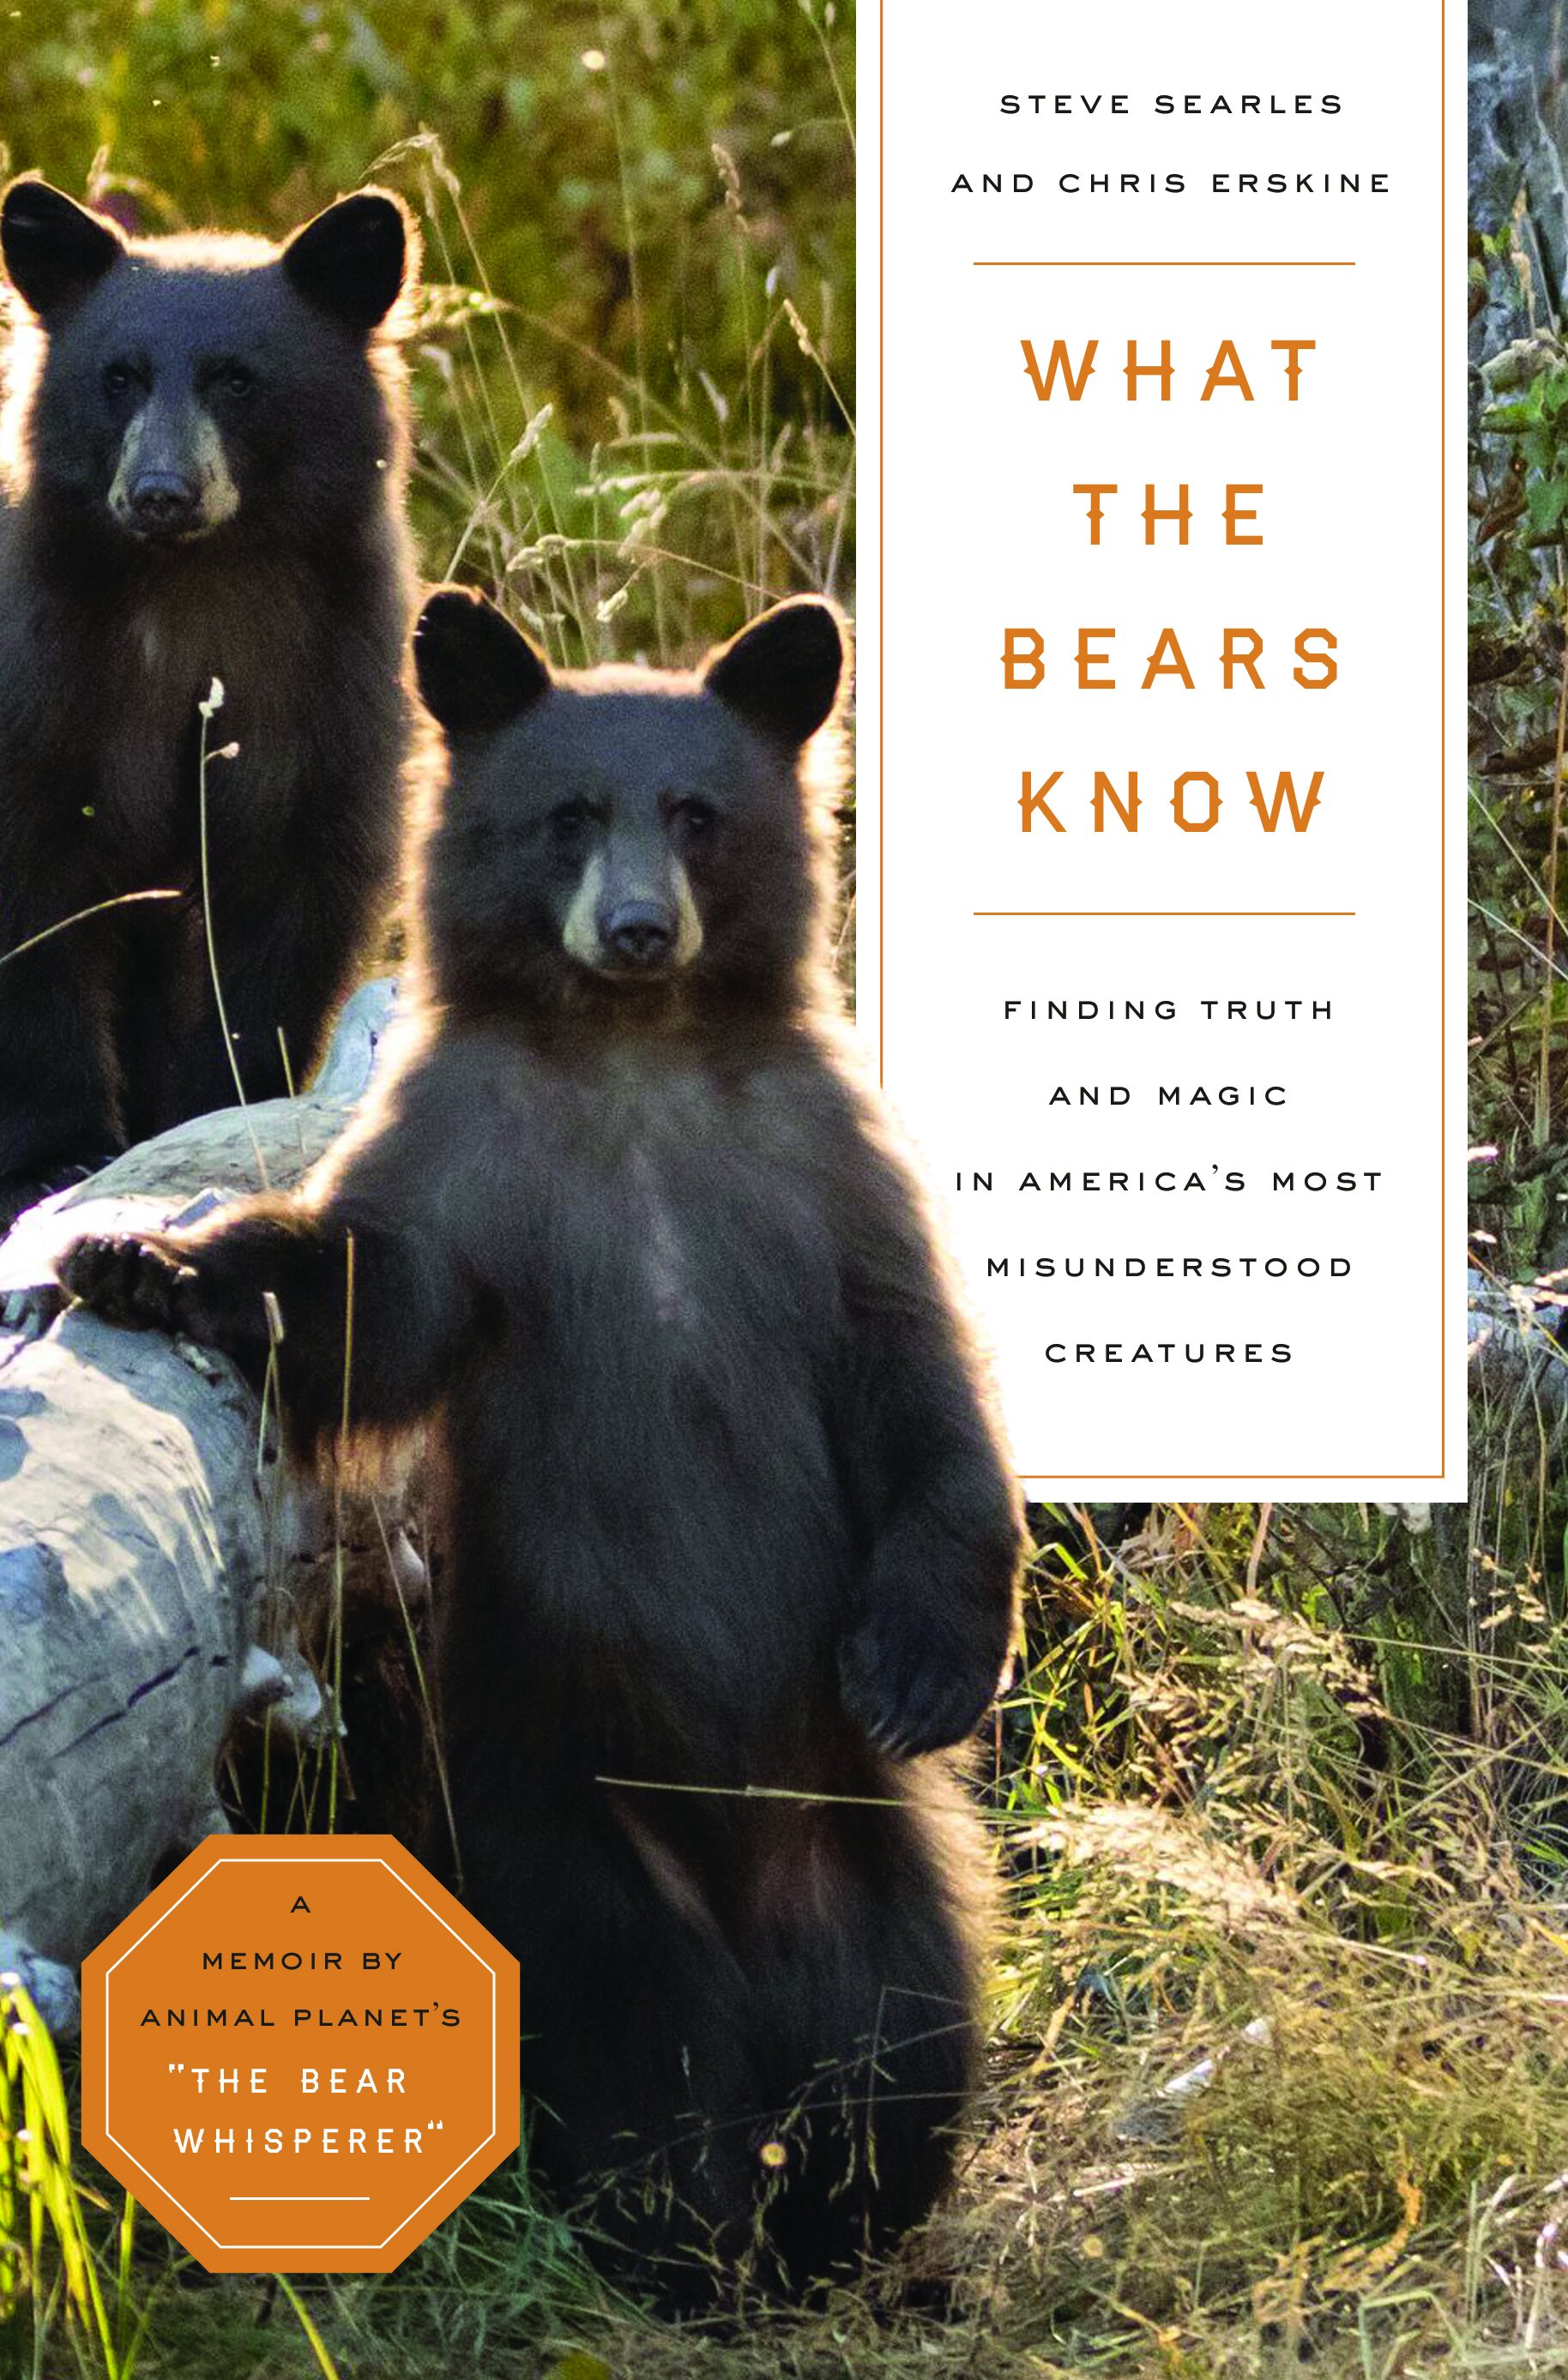 What the Bears Know by Steve Searles and Chris Erskine